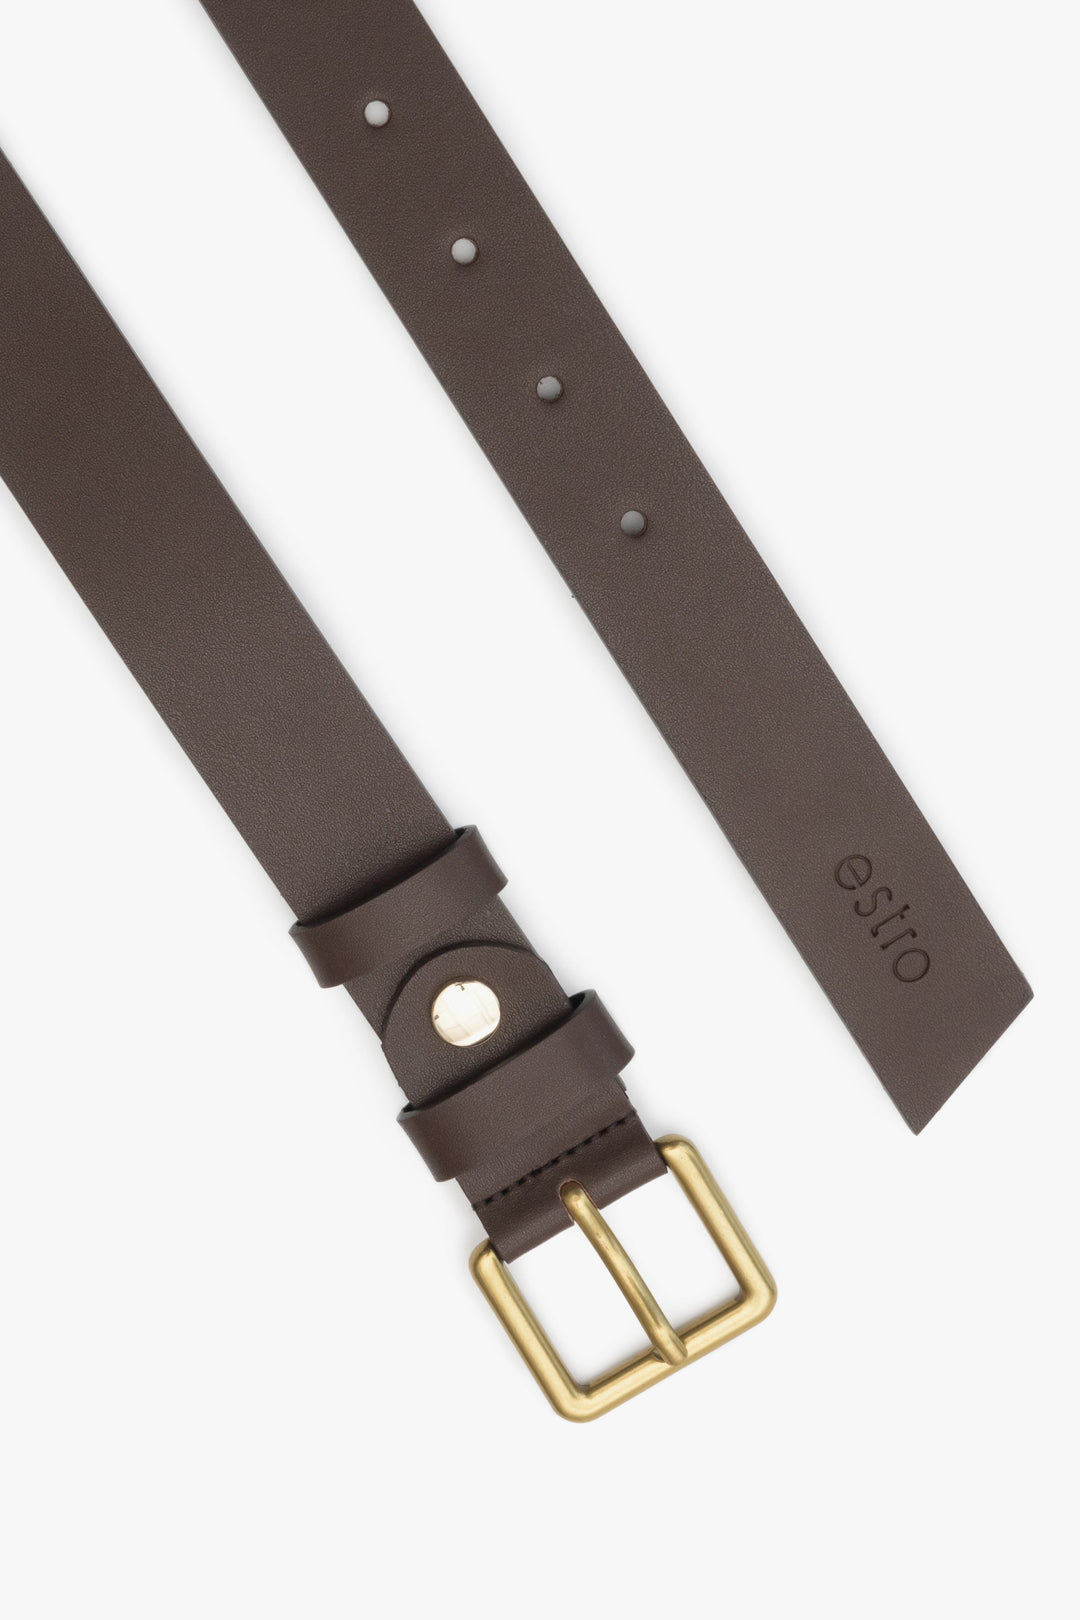 Brown women's belt with a gold buckle Estro.